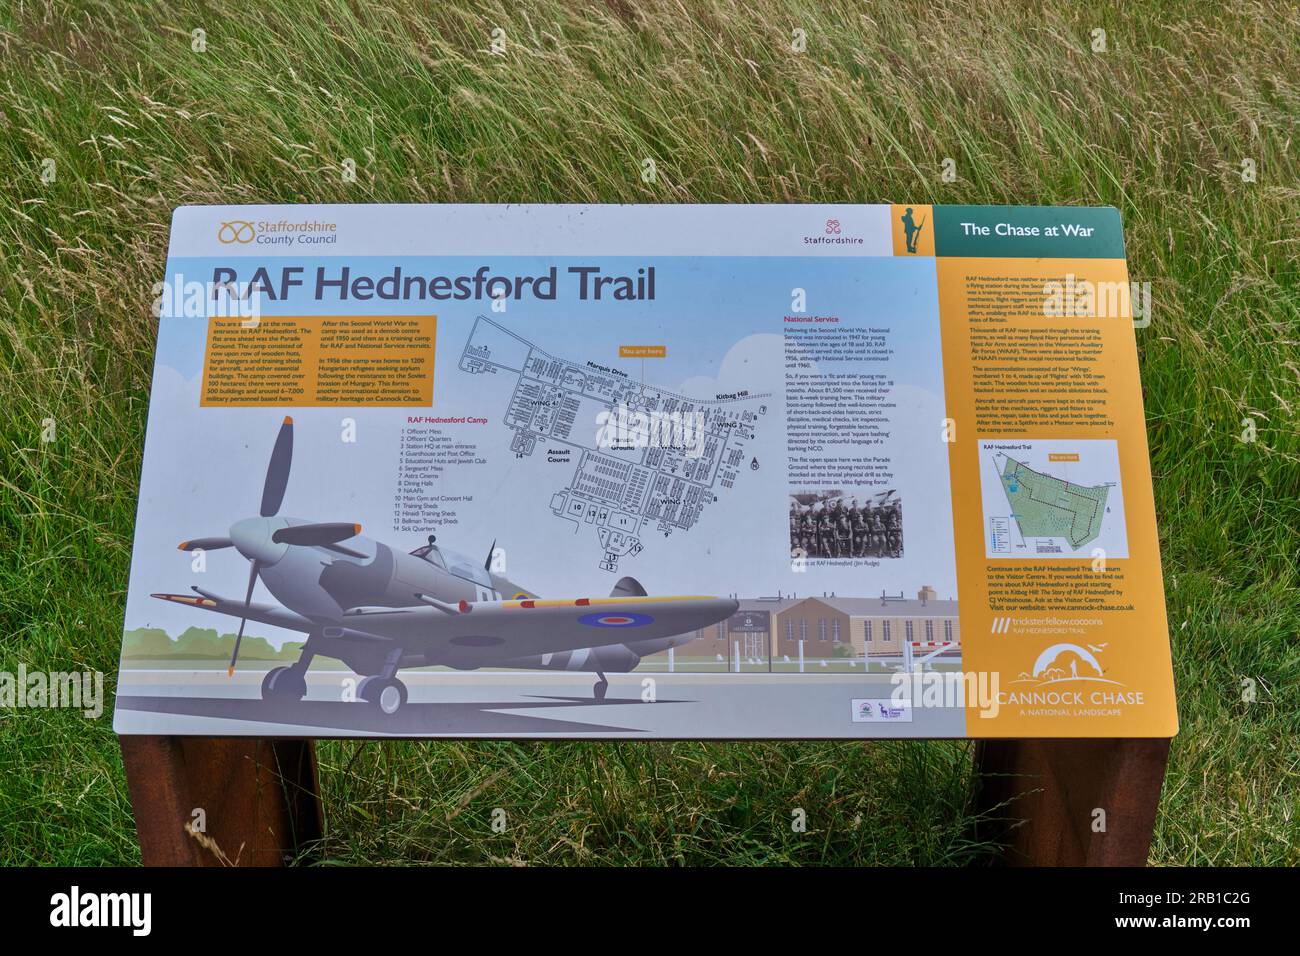 Information Panel about the RAF Hednesford Trail at Cannock Chase, Staffordshire Stock Photo